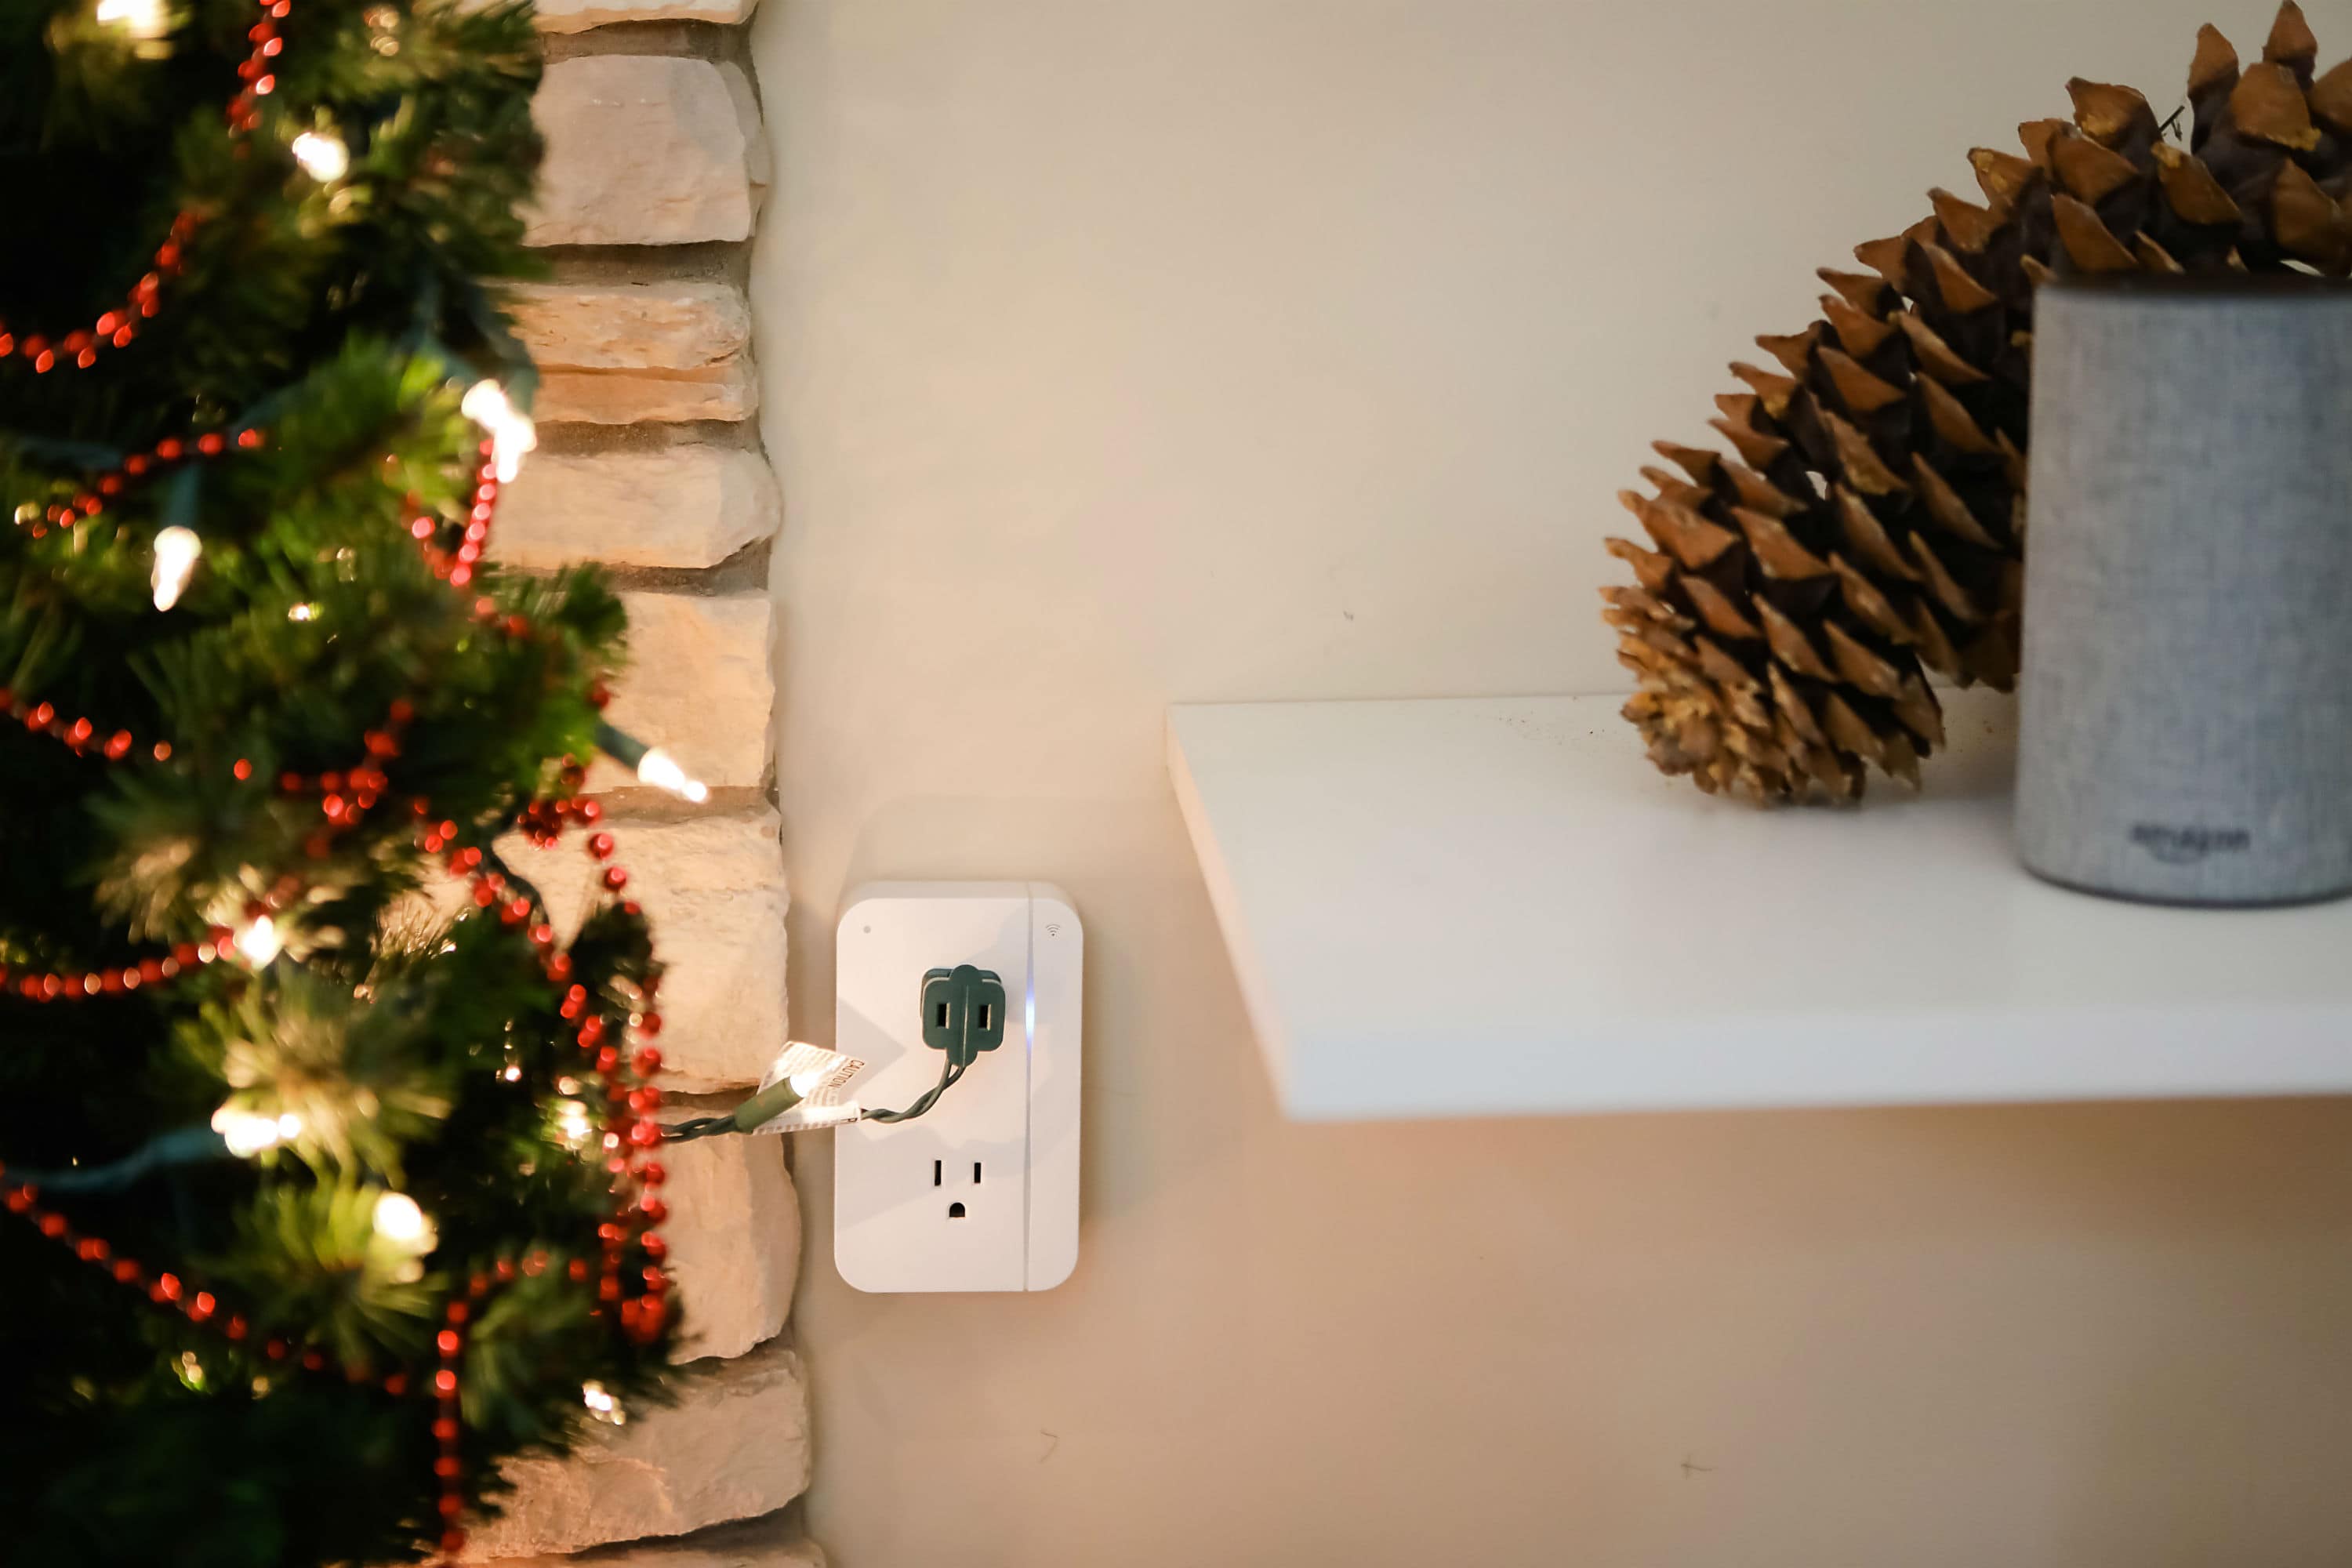 Nobody's outlet is ever this easy to reach, which makes the ConnectSense Smart Outlet2 with HomeKit compatibility even more useful.